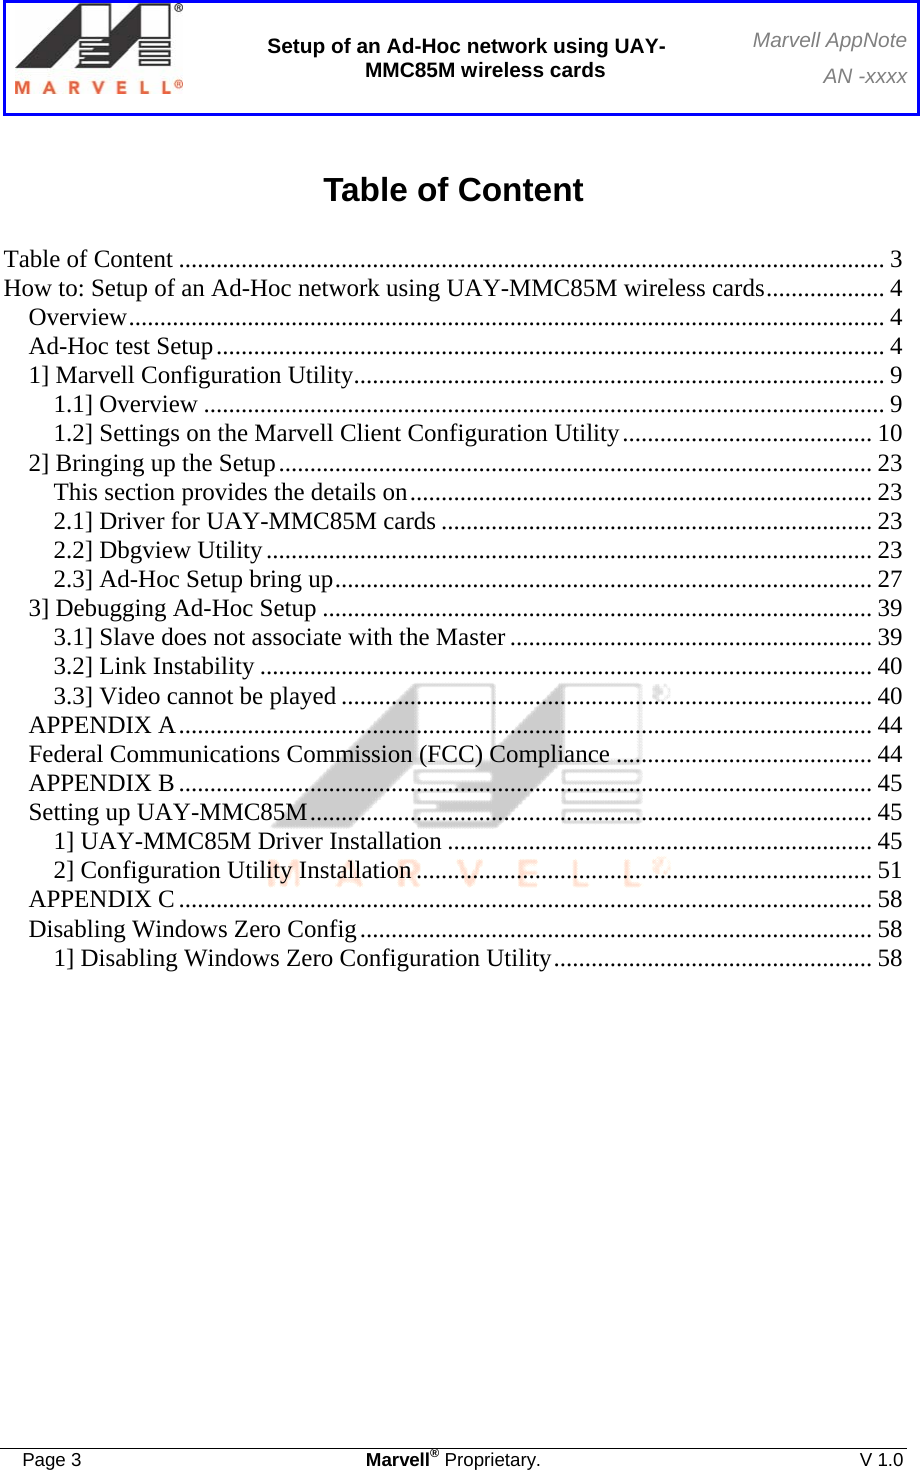  Setup of an Ad-Hoc network using UAY-MMC85M wireless cards Marvell AppNoteAN -xxxx  Page 3  Marvell® Proprietary.  V 1.0  Table of Content  Table of Content ................................................................................................................. 3 How to: Setup of an Ad-Hoc network using UAY-MMC85M wireless cards................... 4 Overview......................................................................................................................... 4 Ad-Hoc test Setup........................................................................................................... 4 1] Marvell Configuration Utility..................................................................................... 9 1.1] Overview ............................................................................................................. 9 1.2] Settings on the Marvell Client Configuration Utility........................................ 10 2] Bringing up the Setup............................................................................................... 23 This section provides the details on.......................................................................... 23 2.1] Driver for UAY-MMC85M cards ..................................................................... 23 2.2] Dbgview Utility................................................................................................. 23 2.3] Ad-Hoc Setup bring up...................................................................................... 27 3] Debugging Ad-Hoc Setup ........................................................................................ 39 3.1] Slave does not associate with the Master .......................................................... 39 3.2] Link Instability .................................................................................................. 40 3.3] Video cannot be played ..................................................................................... 40 APPENDIX A............................................................................................................... 44 Federal Communications Commission (FCC) Compliance ......................................... 44 APPENDIX B............................................................................................................... 45 Setting up UAY-MMC85M.......................................................................................... 45 1] UAY-MMC85M Driver Installation .................................................................... 45 2] Configuration Utility Installation ......................................................................... 51 APPENDIX C............................................................................................................... 58 Disabling Windows Zero Config.................................................................................. 58 1] Disabling Windows Zero Configuration Utility................................................... 58 